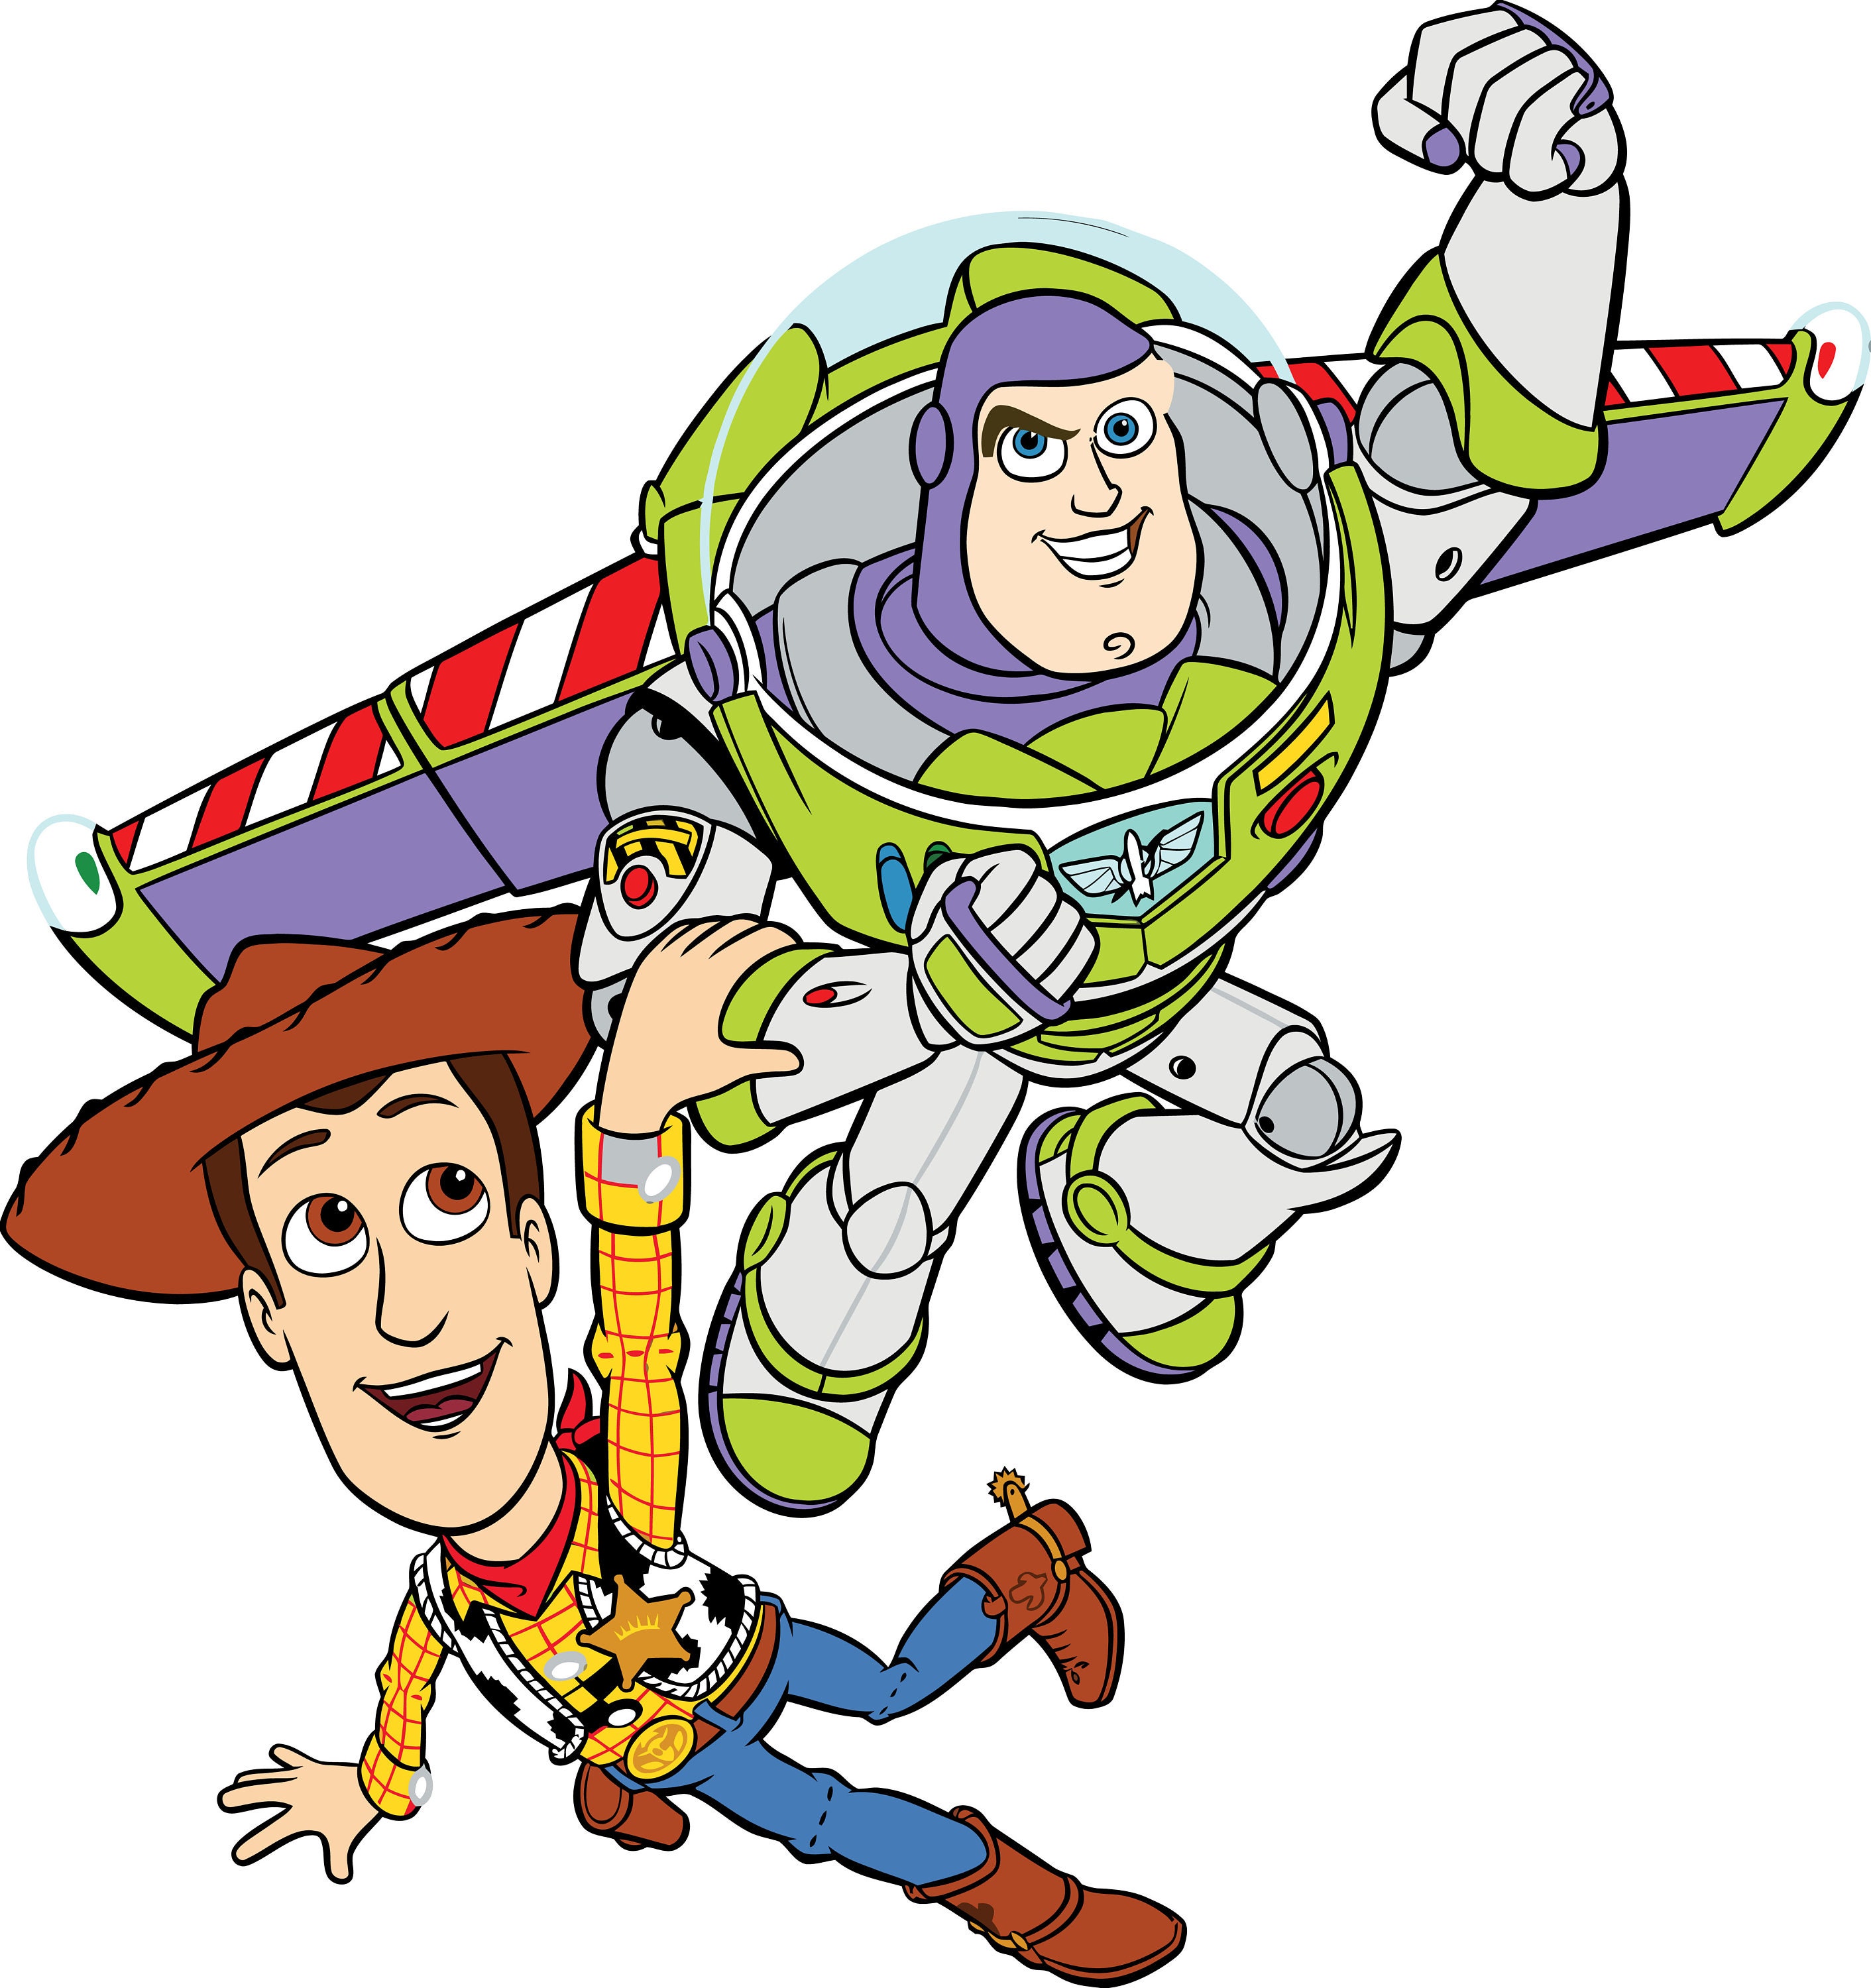 5 Toy Story Files: SVG EPS PNG Dxf Ai files | Etsy